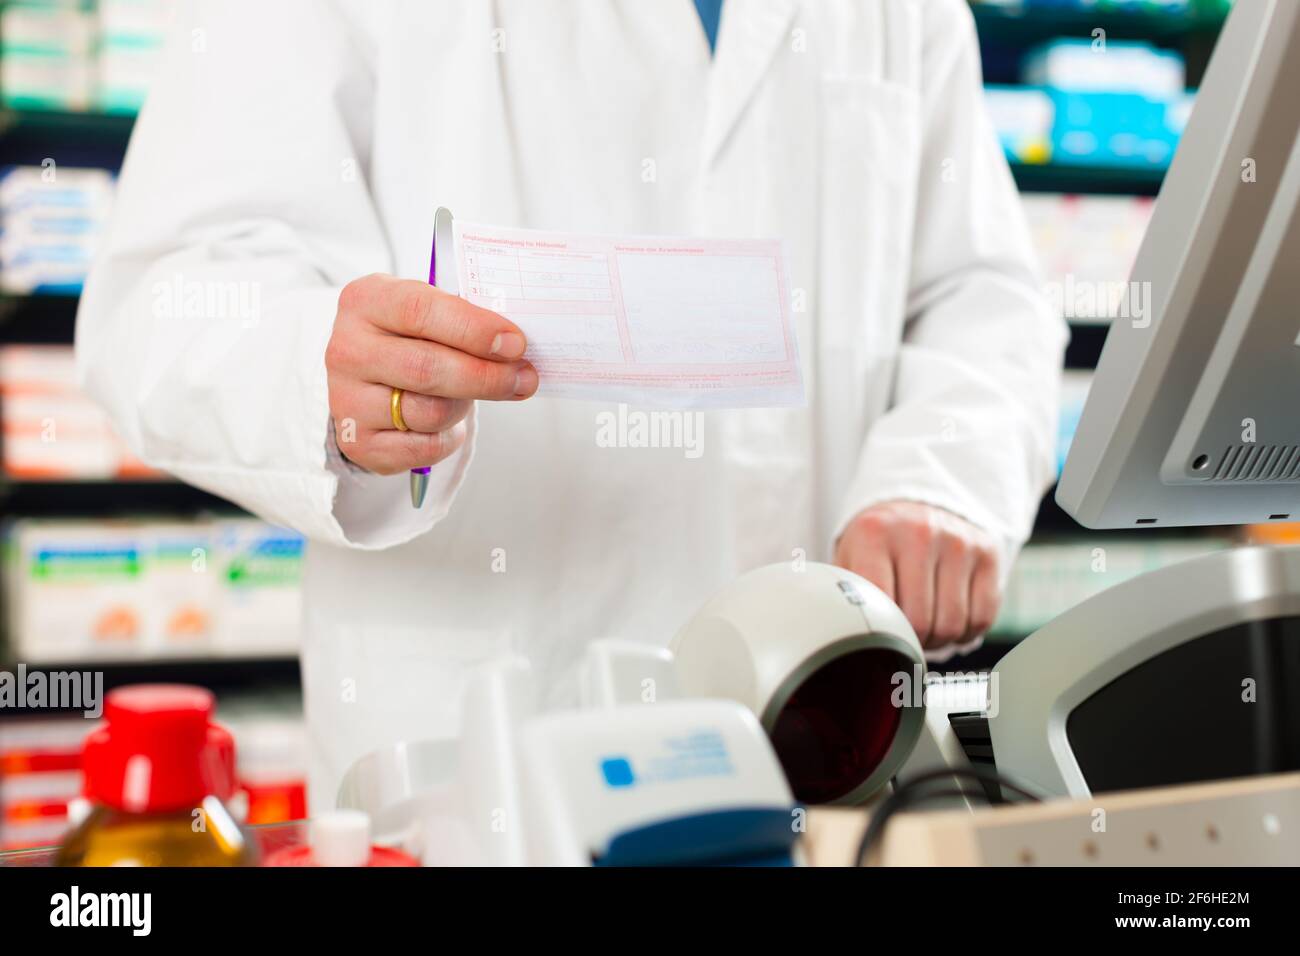 Pharmacist in pharmacy, standing at the cashier he is holding a prescription slip in his hands Stock Photo